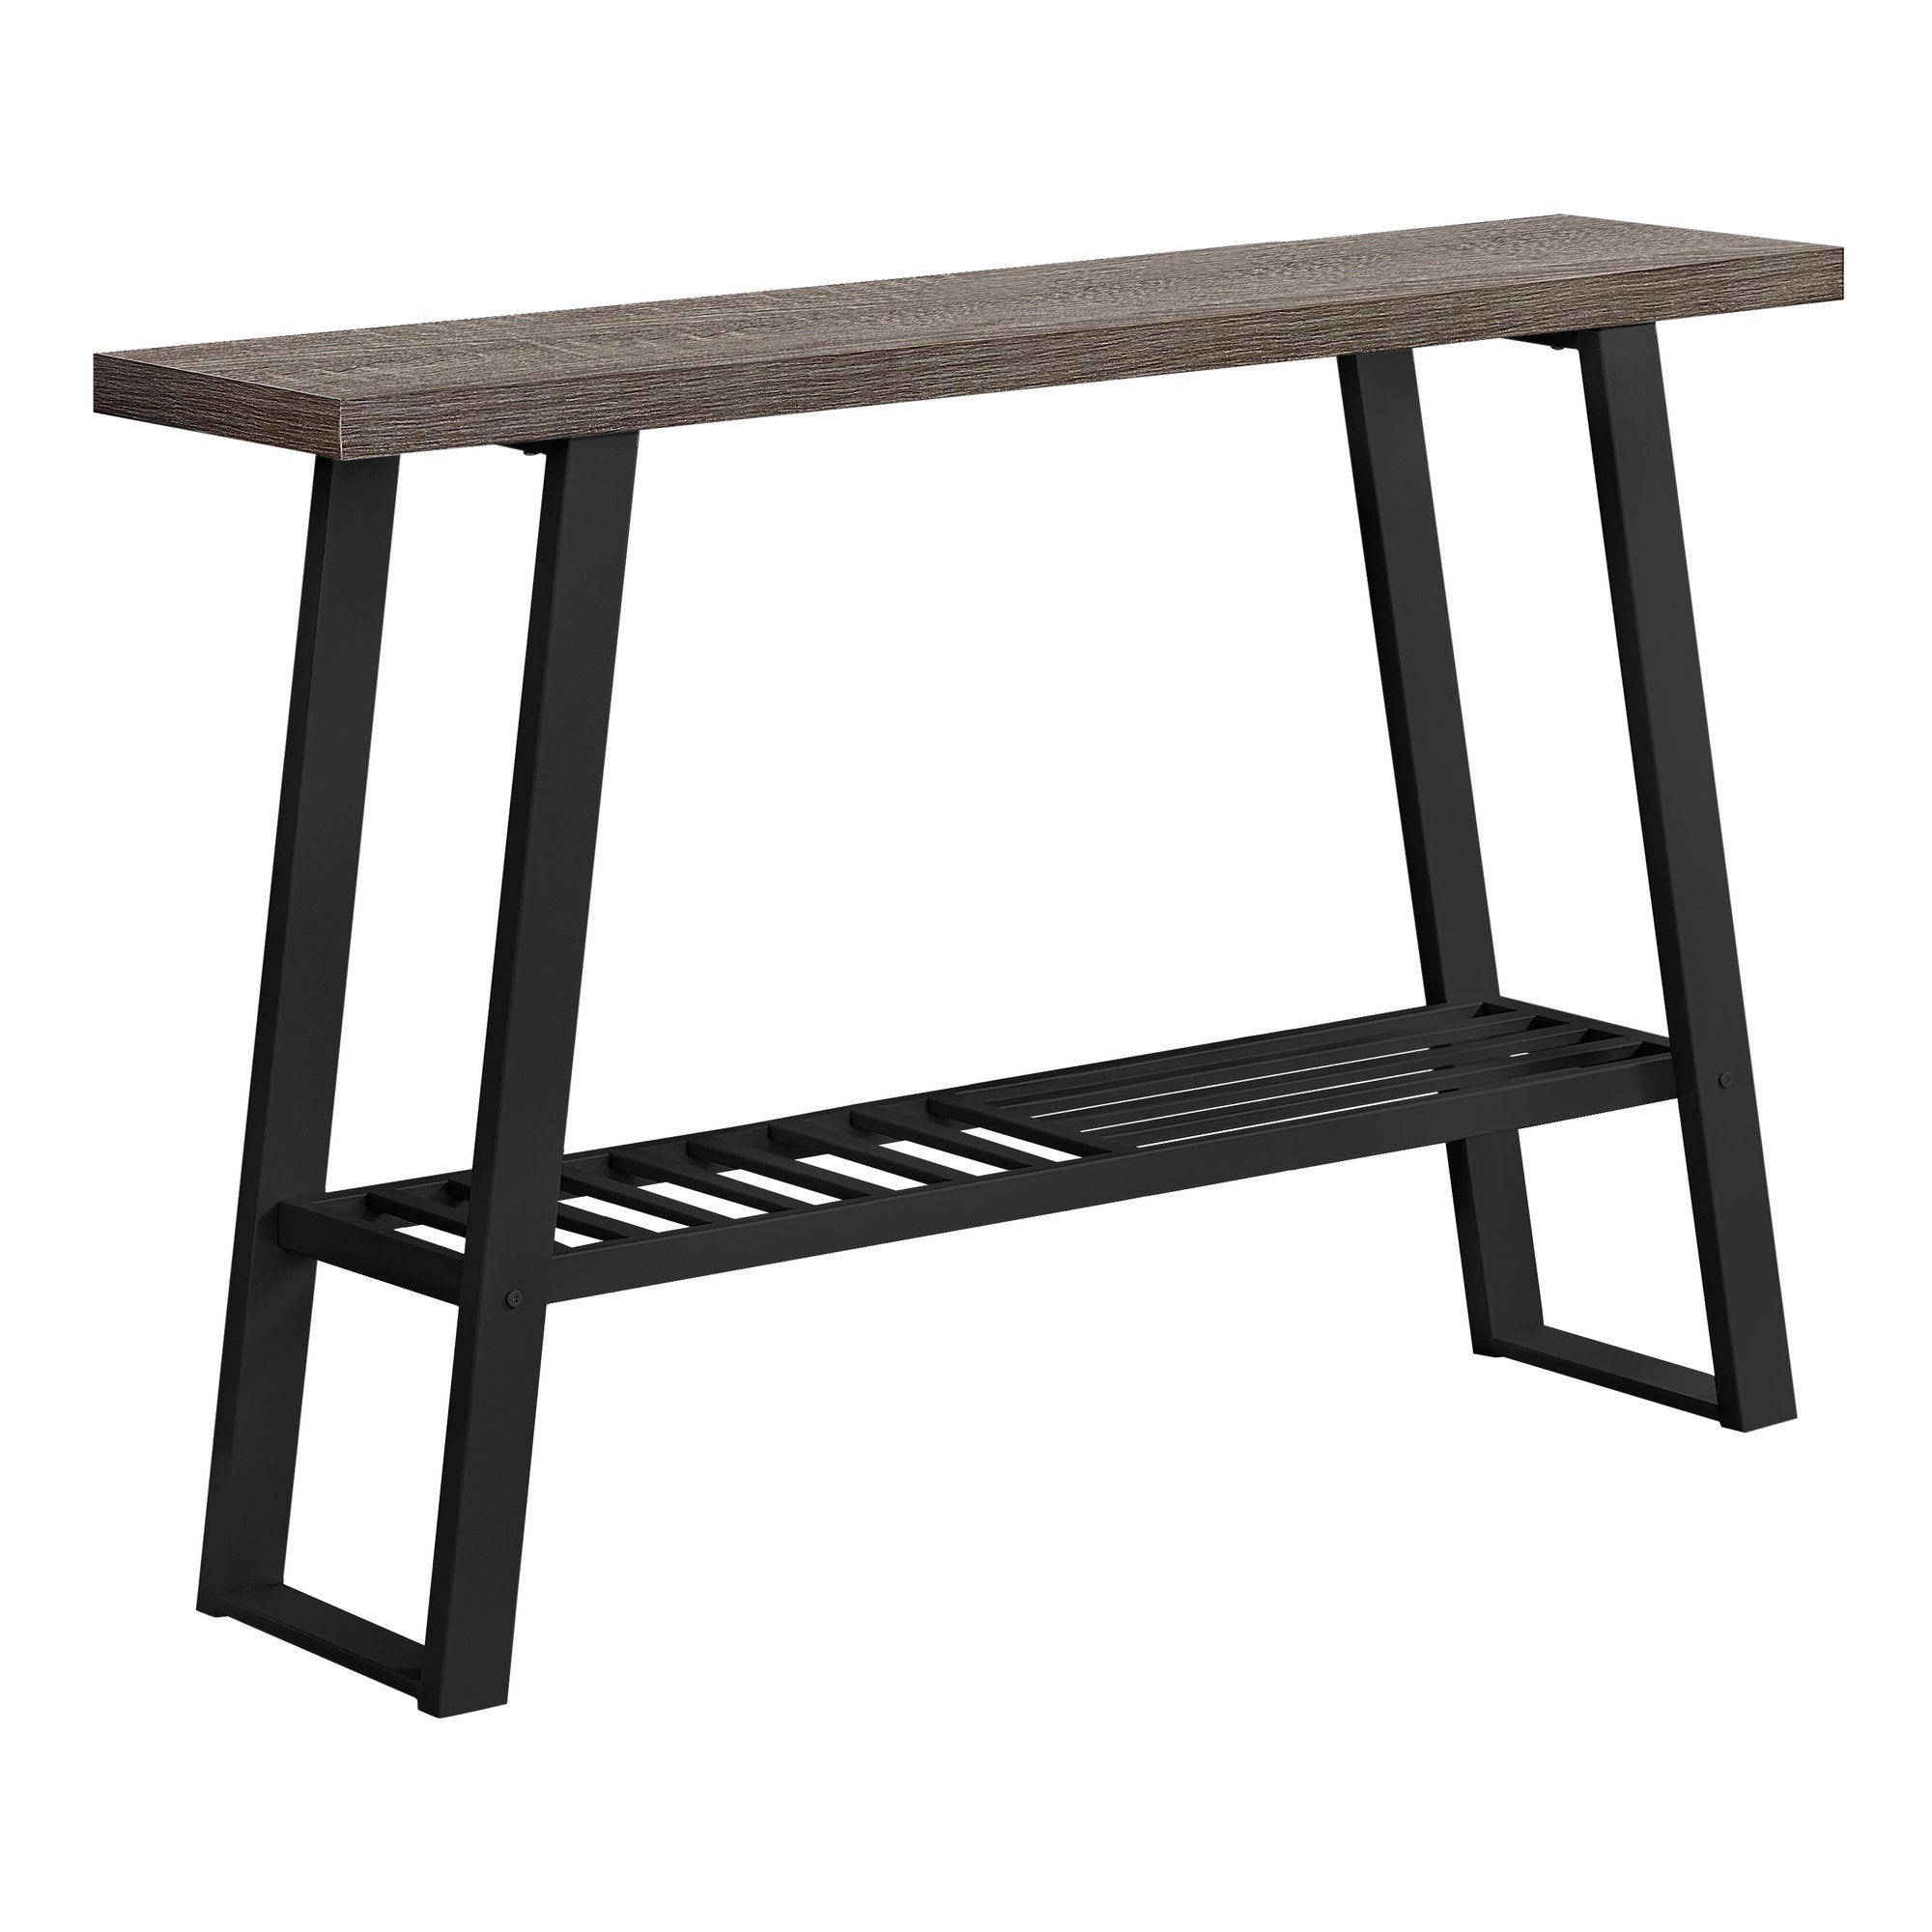 47" Taupe And Black A Frame Console Table With Storage